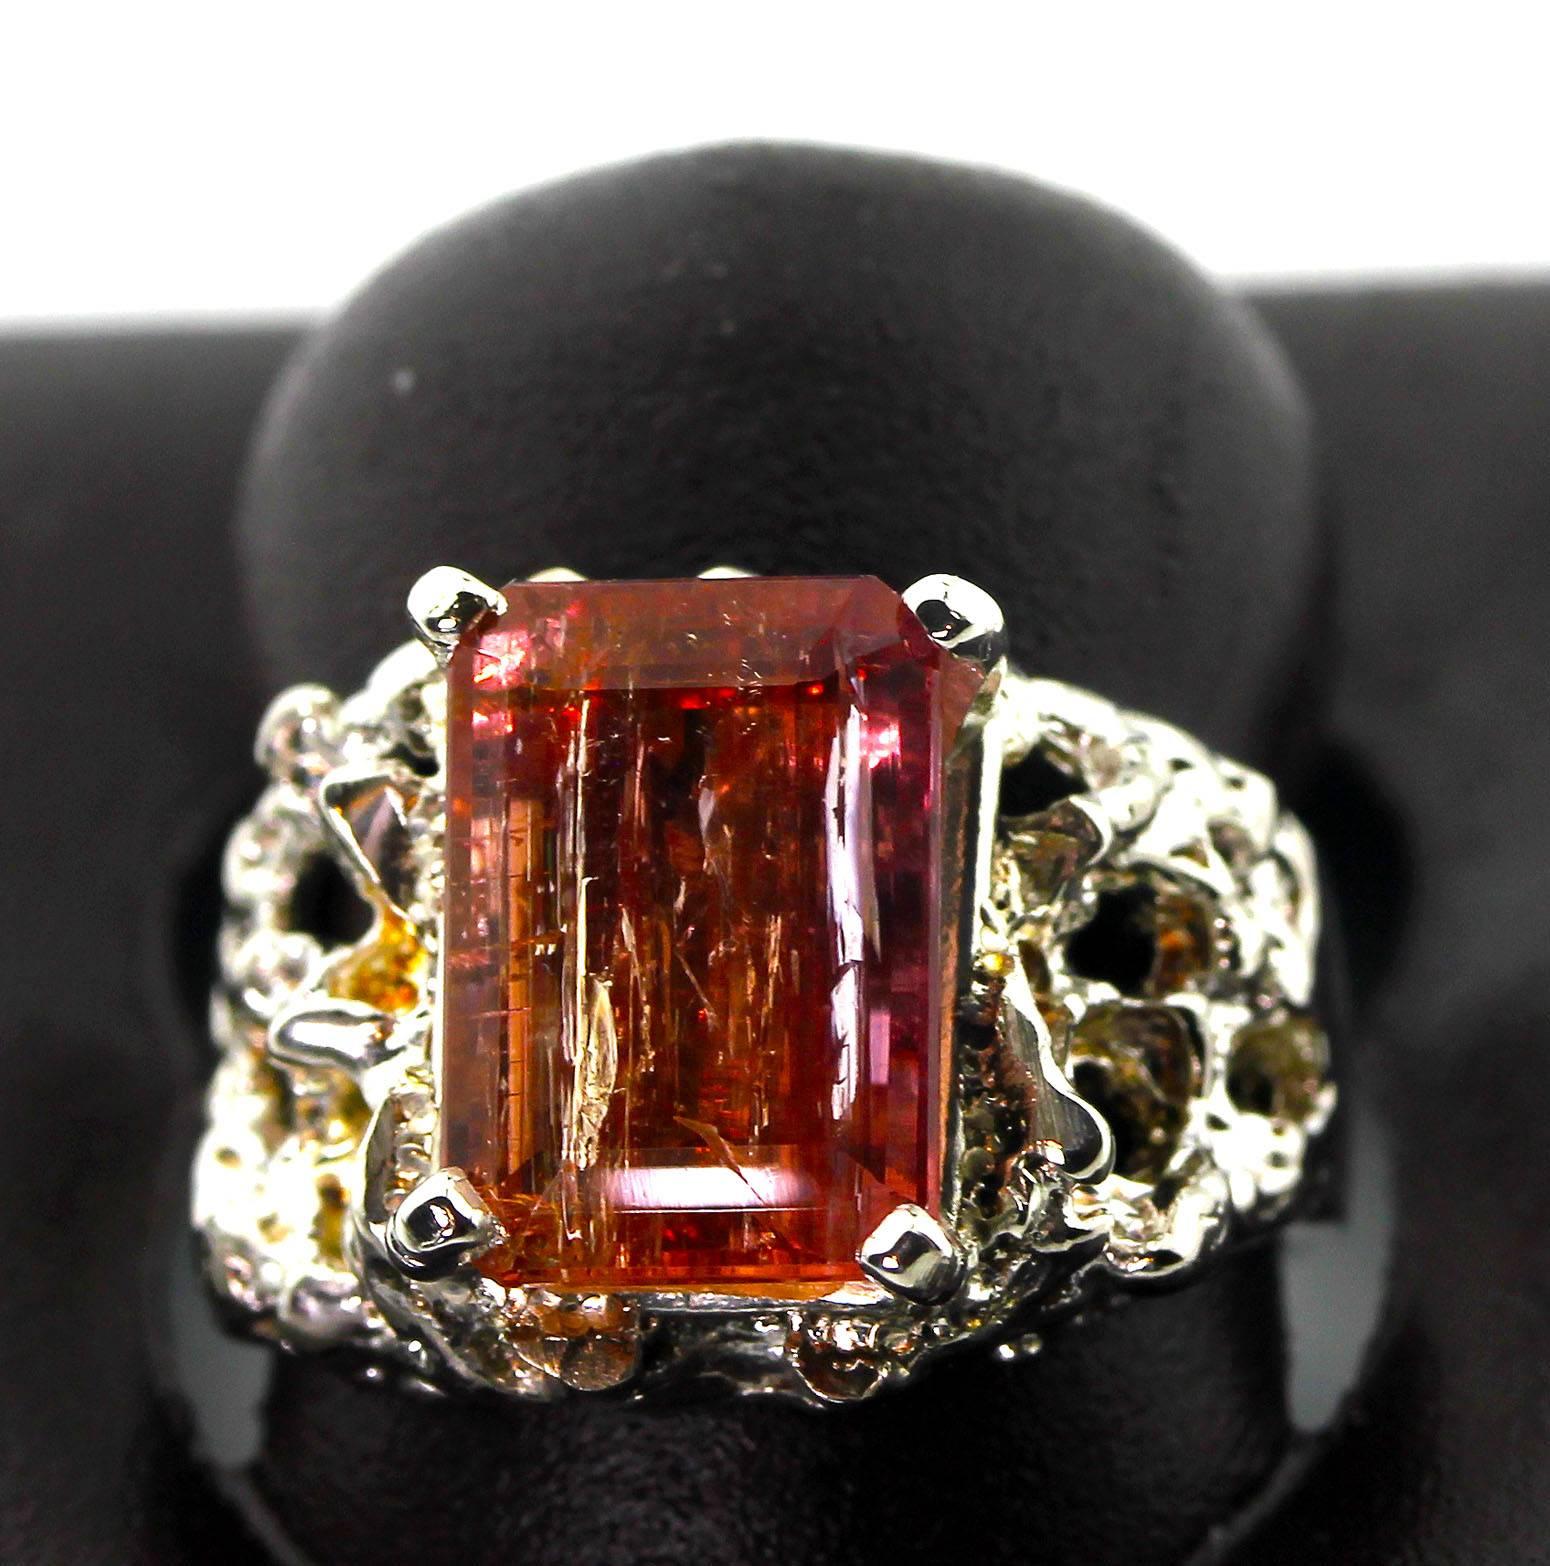 Coming directly from the mines in Minal Gerais near Ouro Preto Brasil, this beautiful natural translucent sparkling pinkyorangy 5.35 Carat emerald cut Imperial Topaz is sent in an antique Sterling Silver ring .  Its so bright it reflects the camera